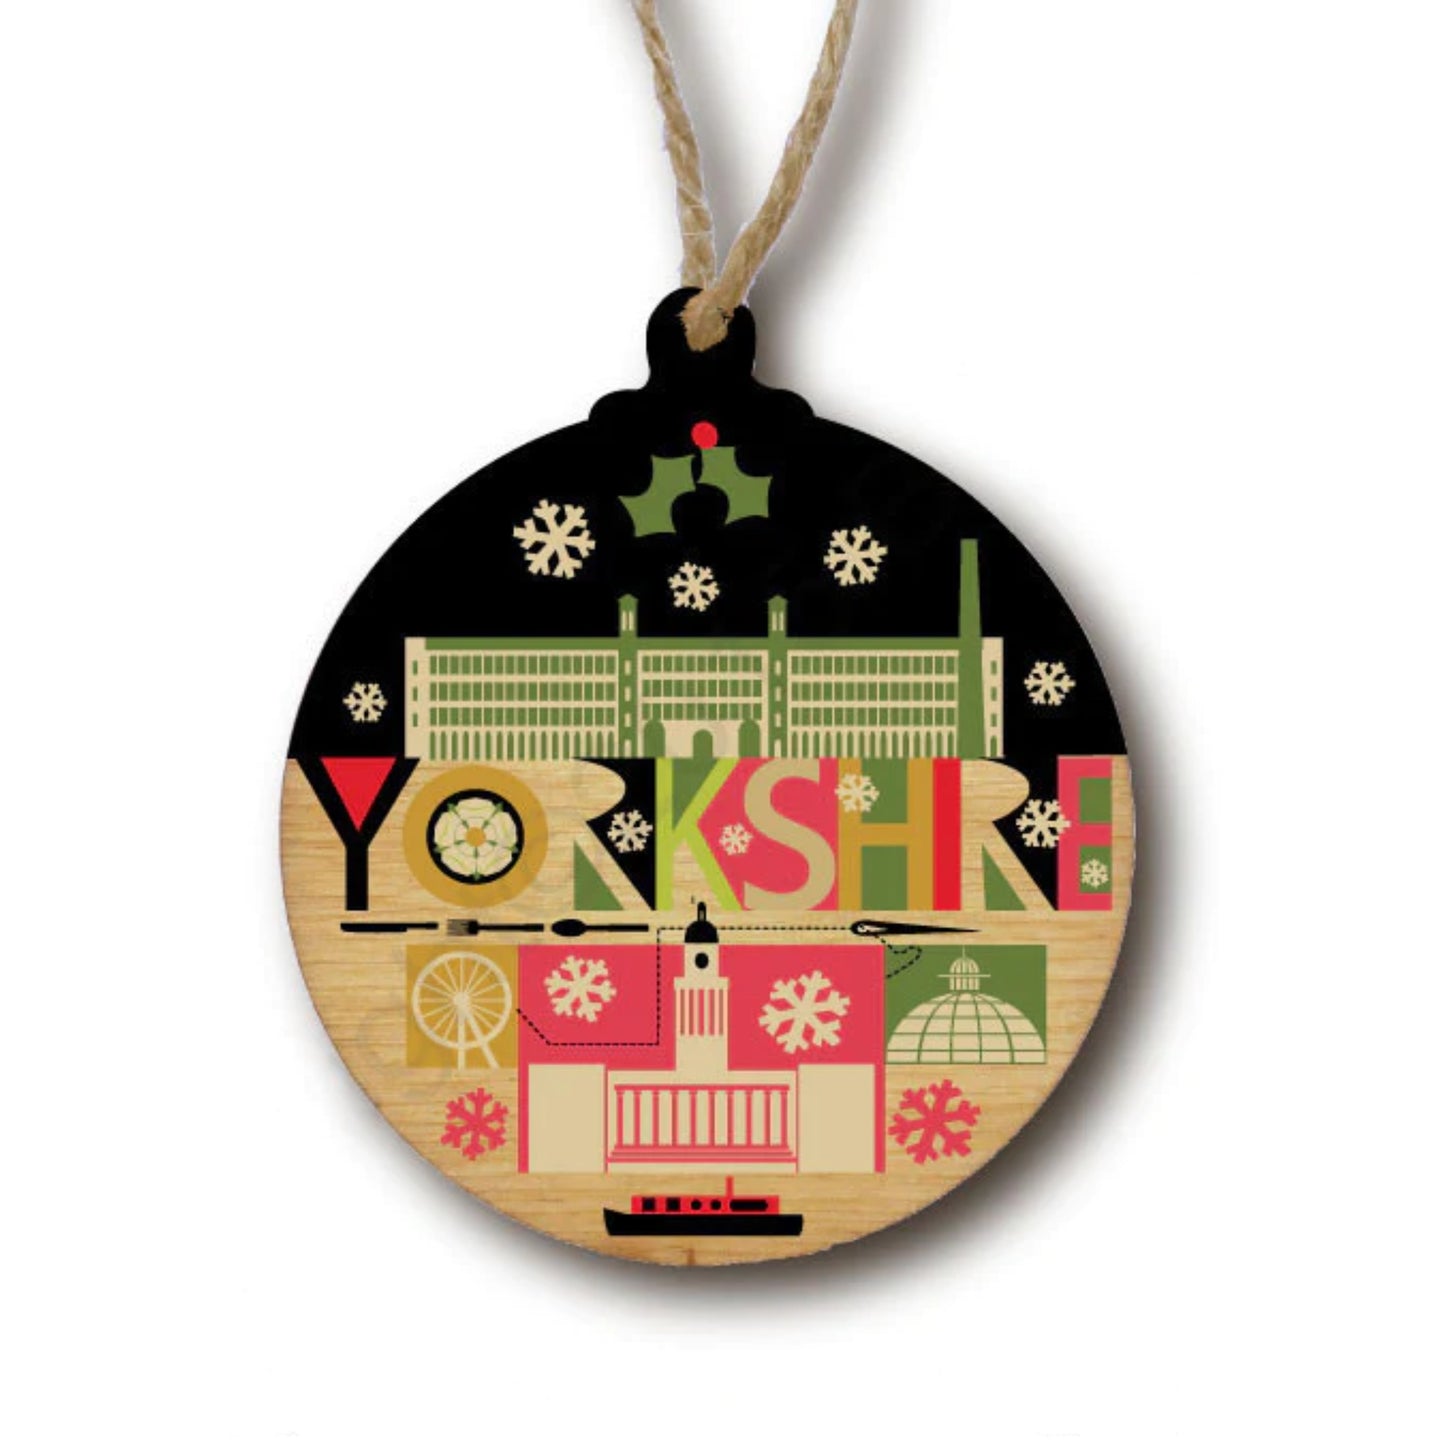 South Yorkshire Scape Rustic Wooden Christmas Decoration - The Great Yorkshire Shop